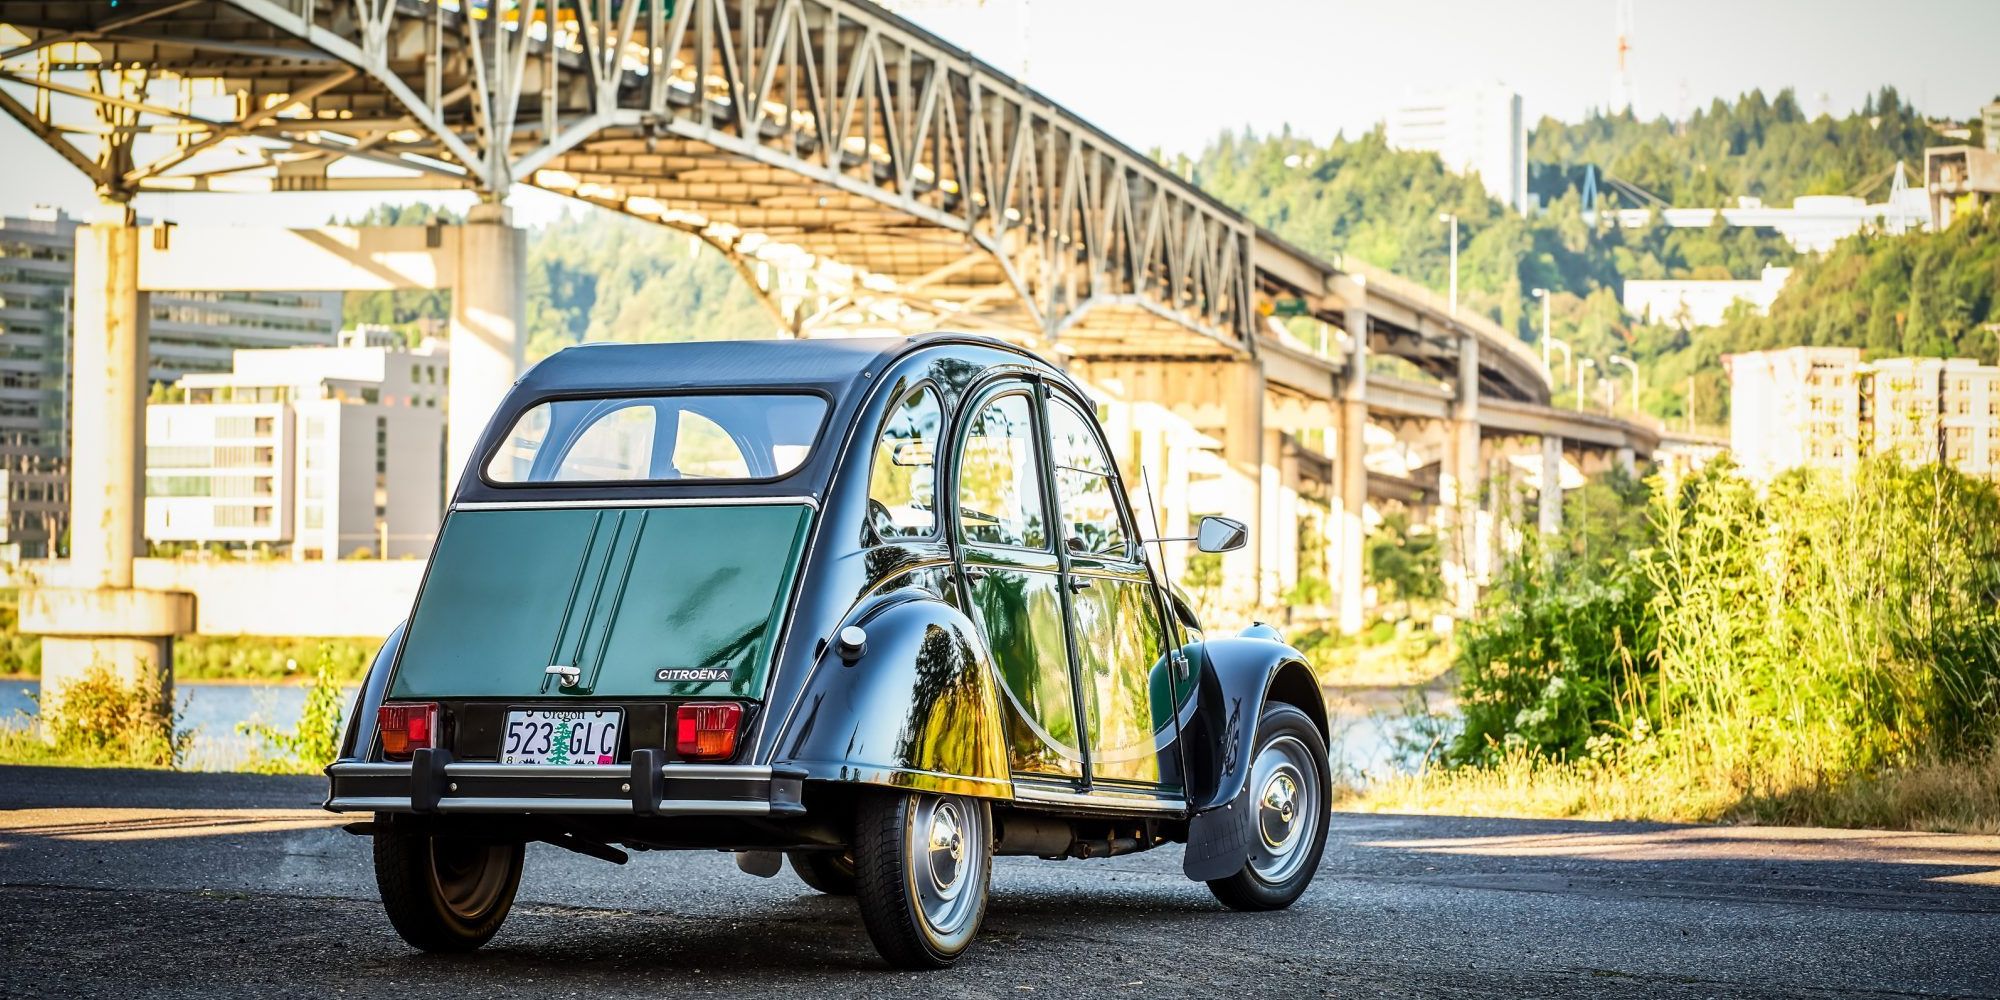 The rear of the 2CV